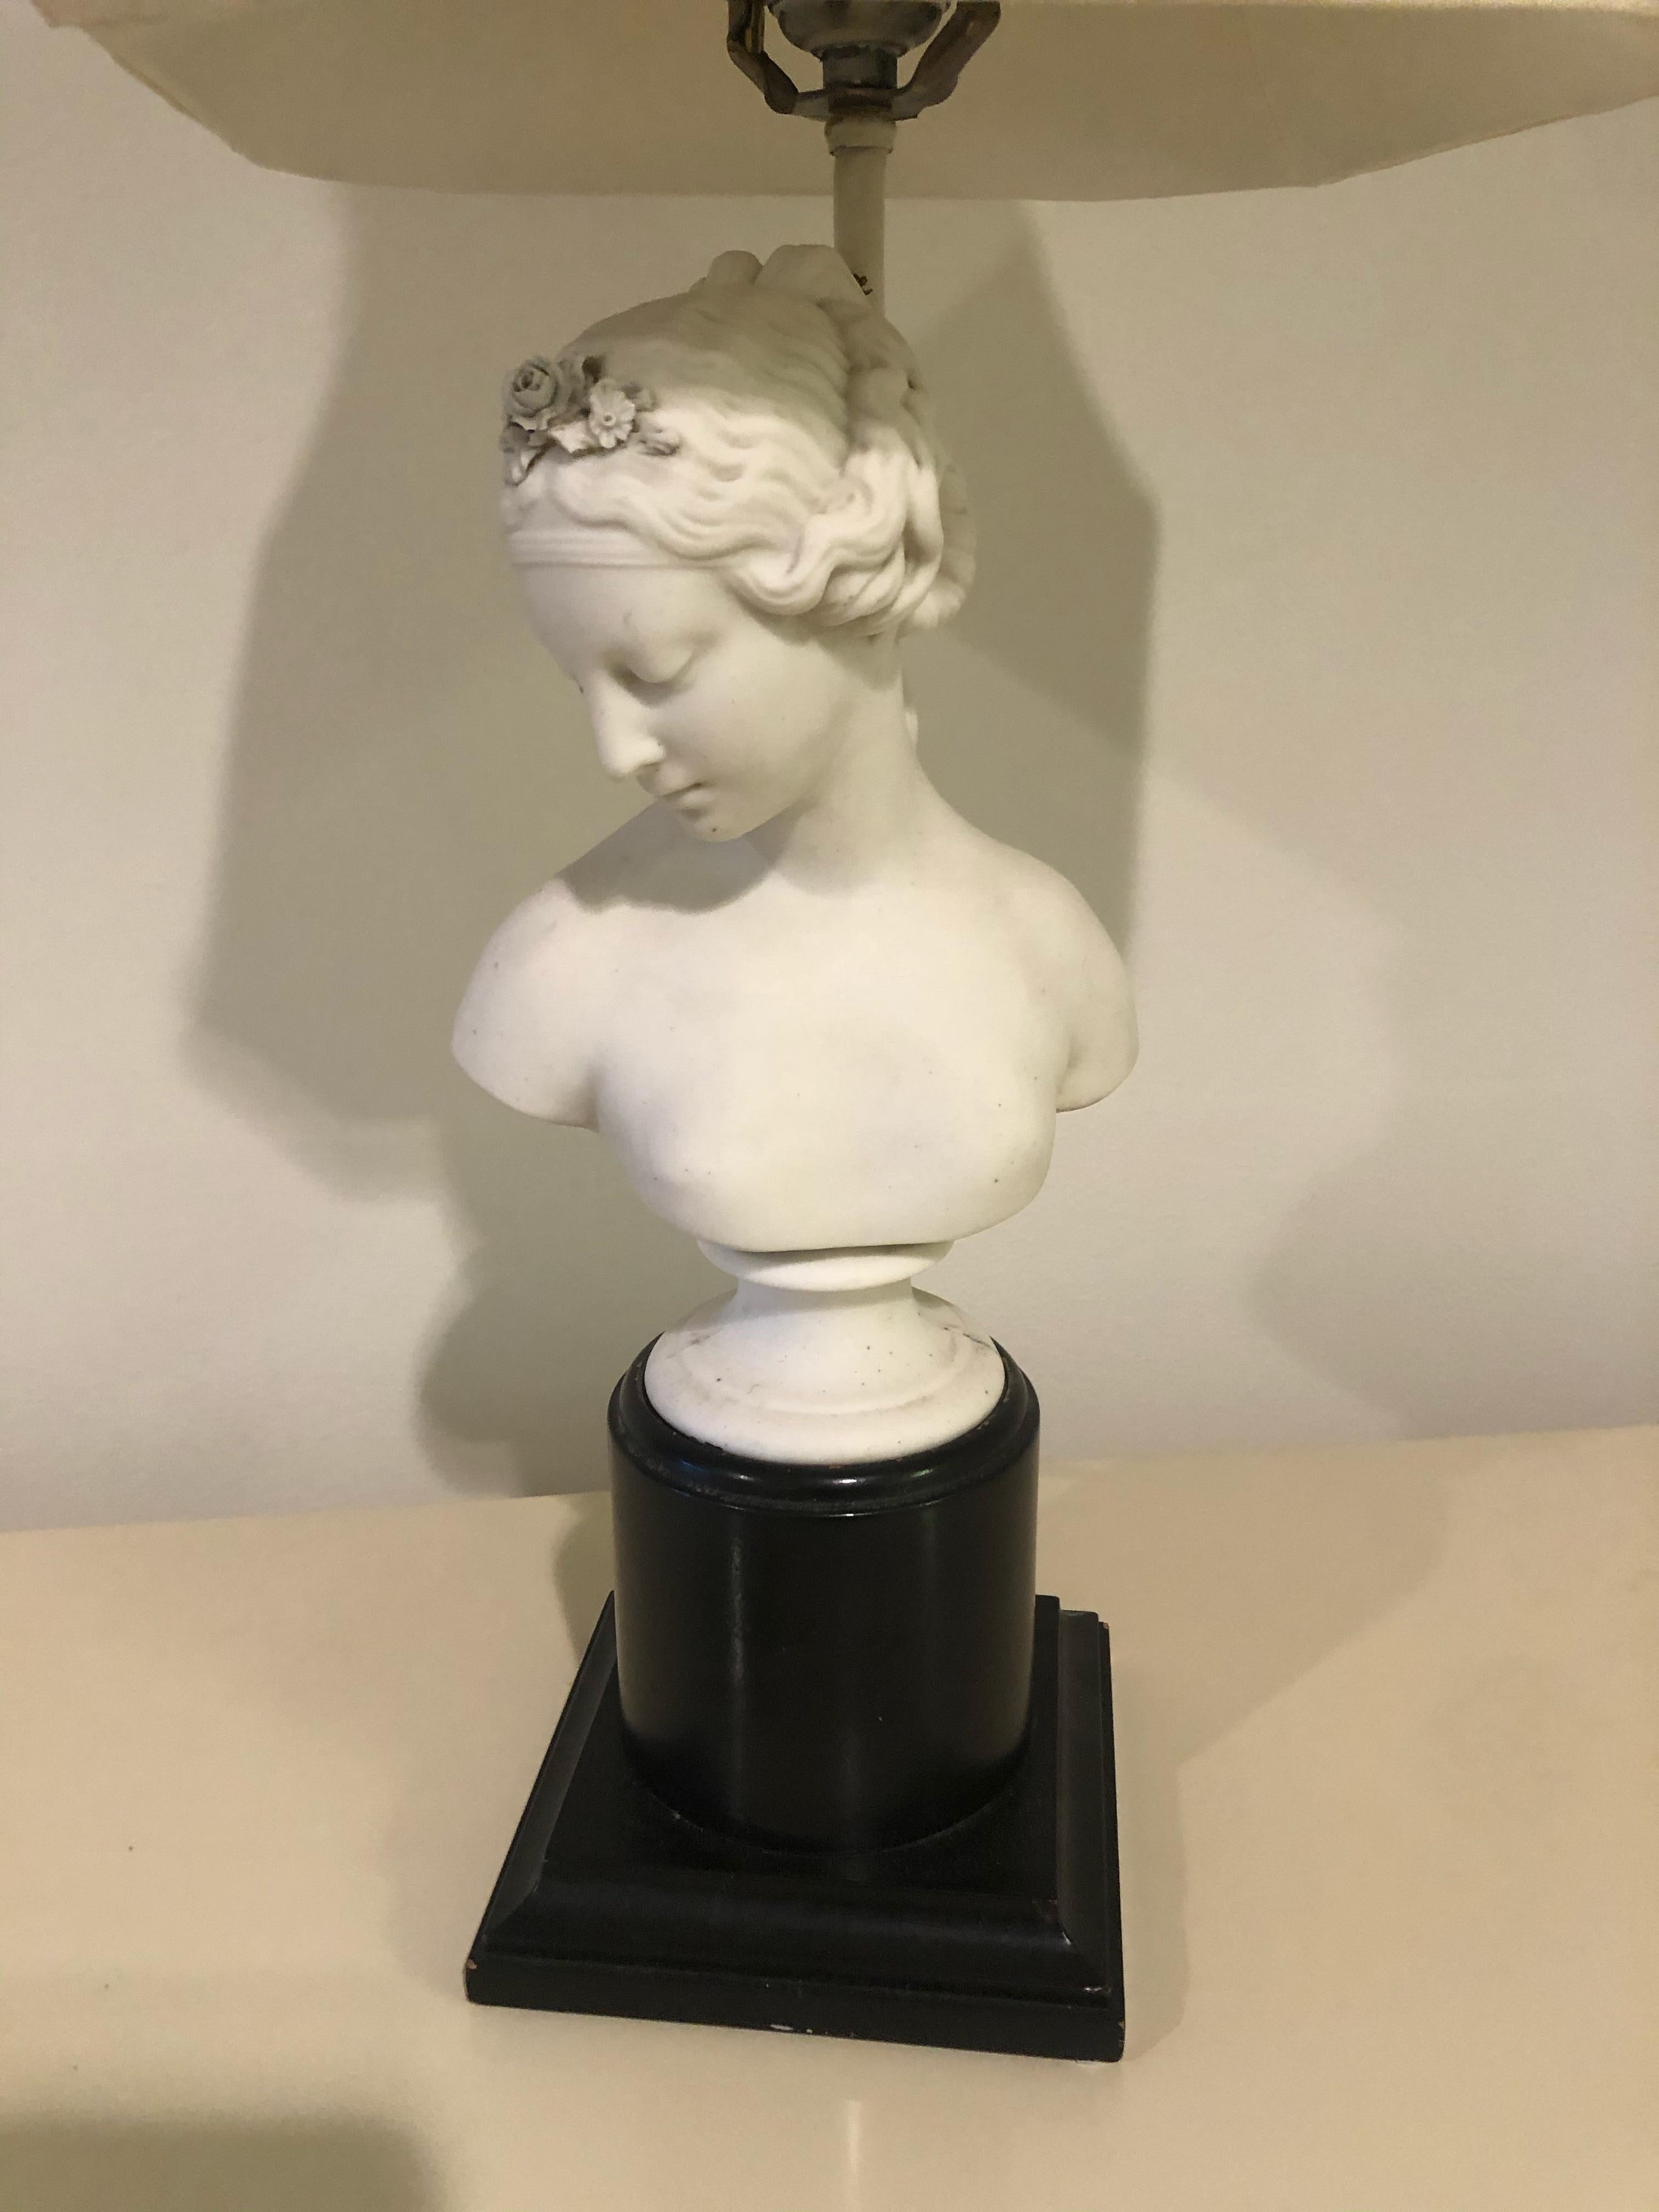 A lovely vintage female plaster bust sculpture converted into a striking table lamp having off white silk shade topped with a wooden finial. White paster bust rests on a black wood plinth.
 